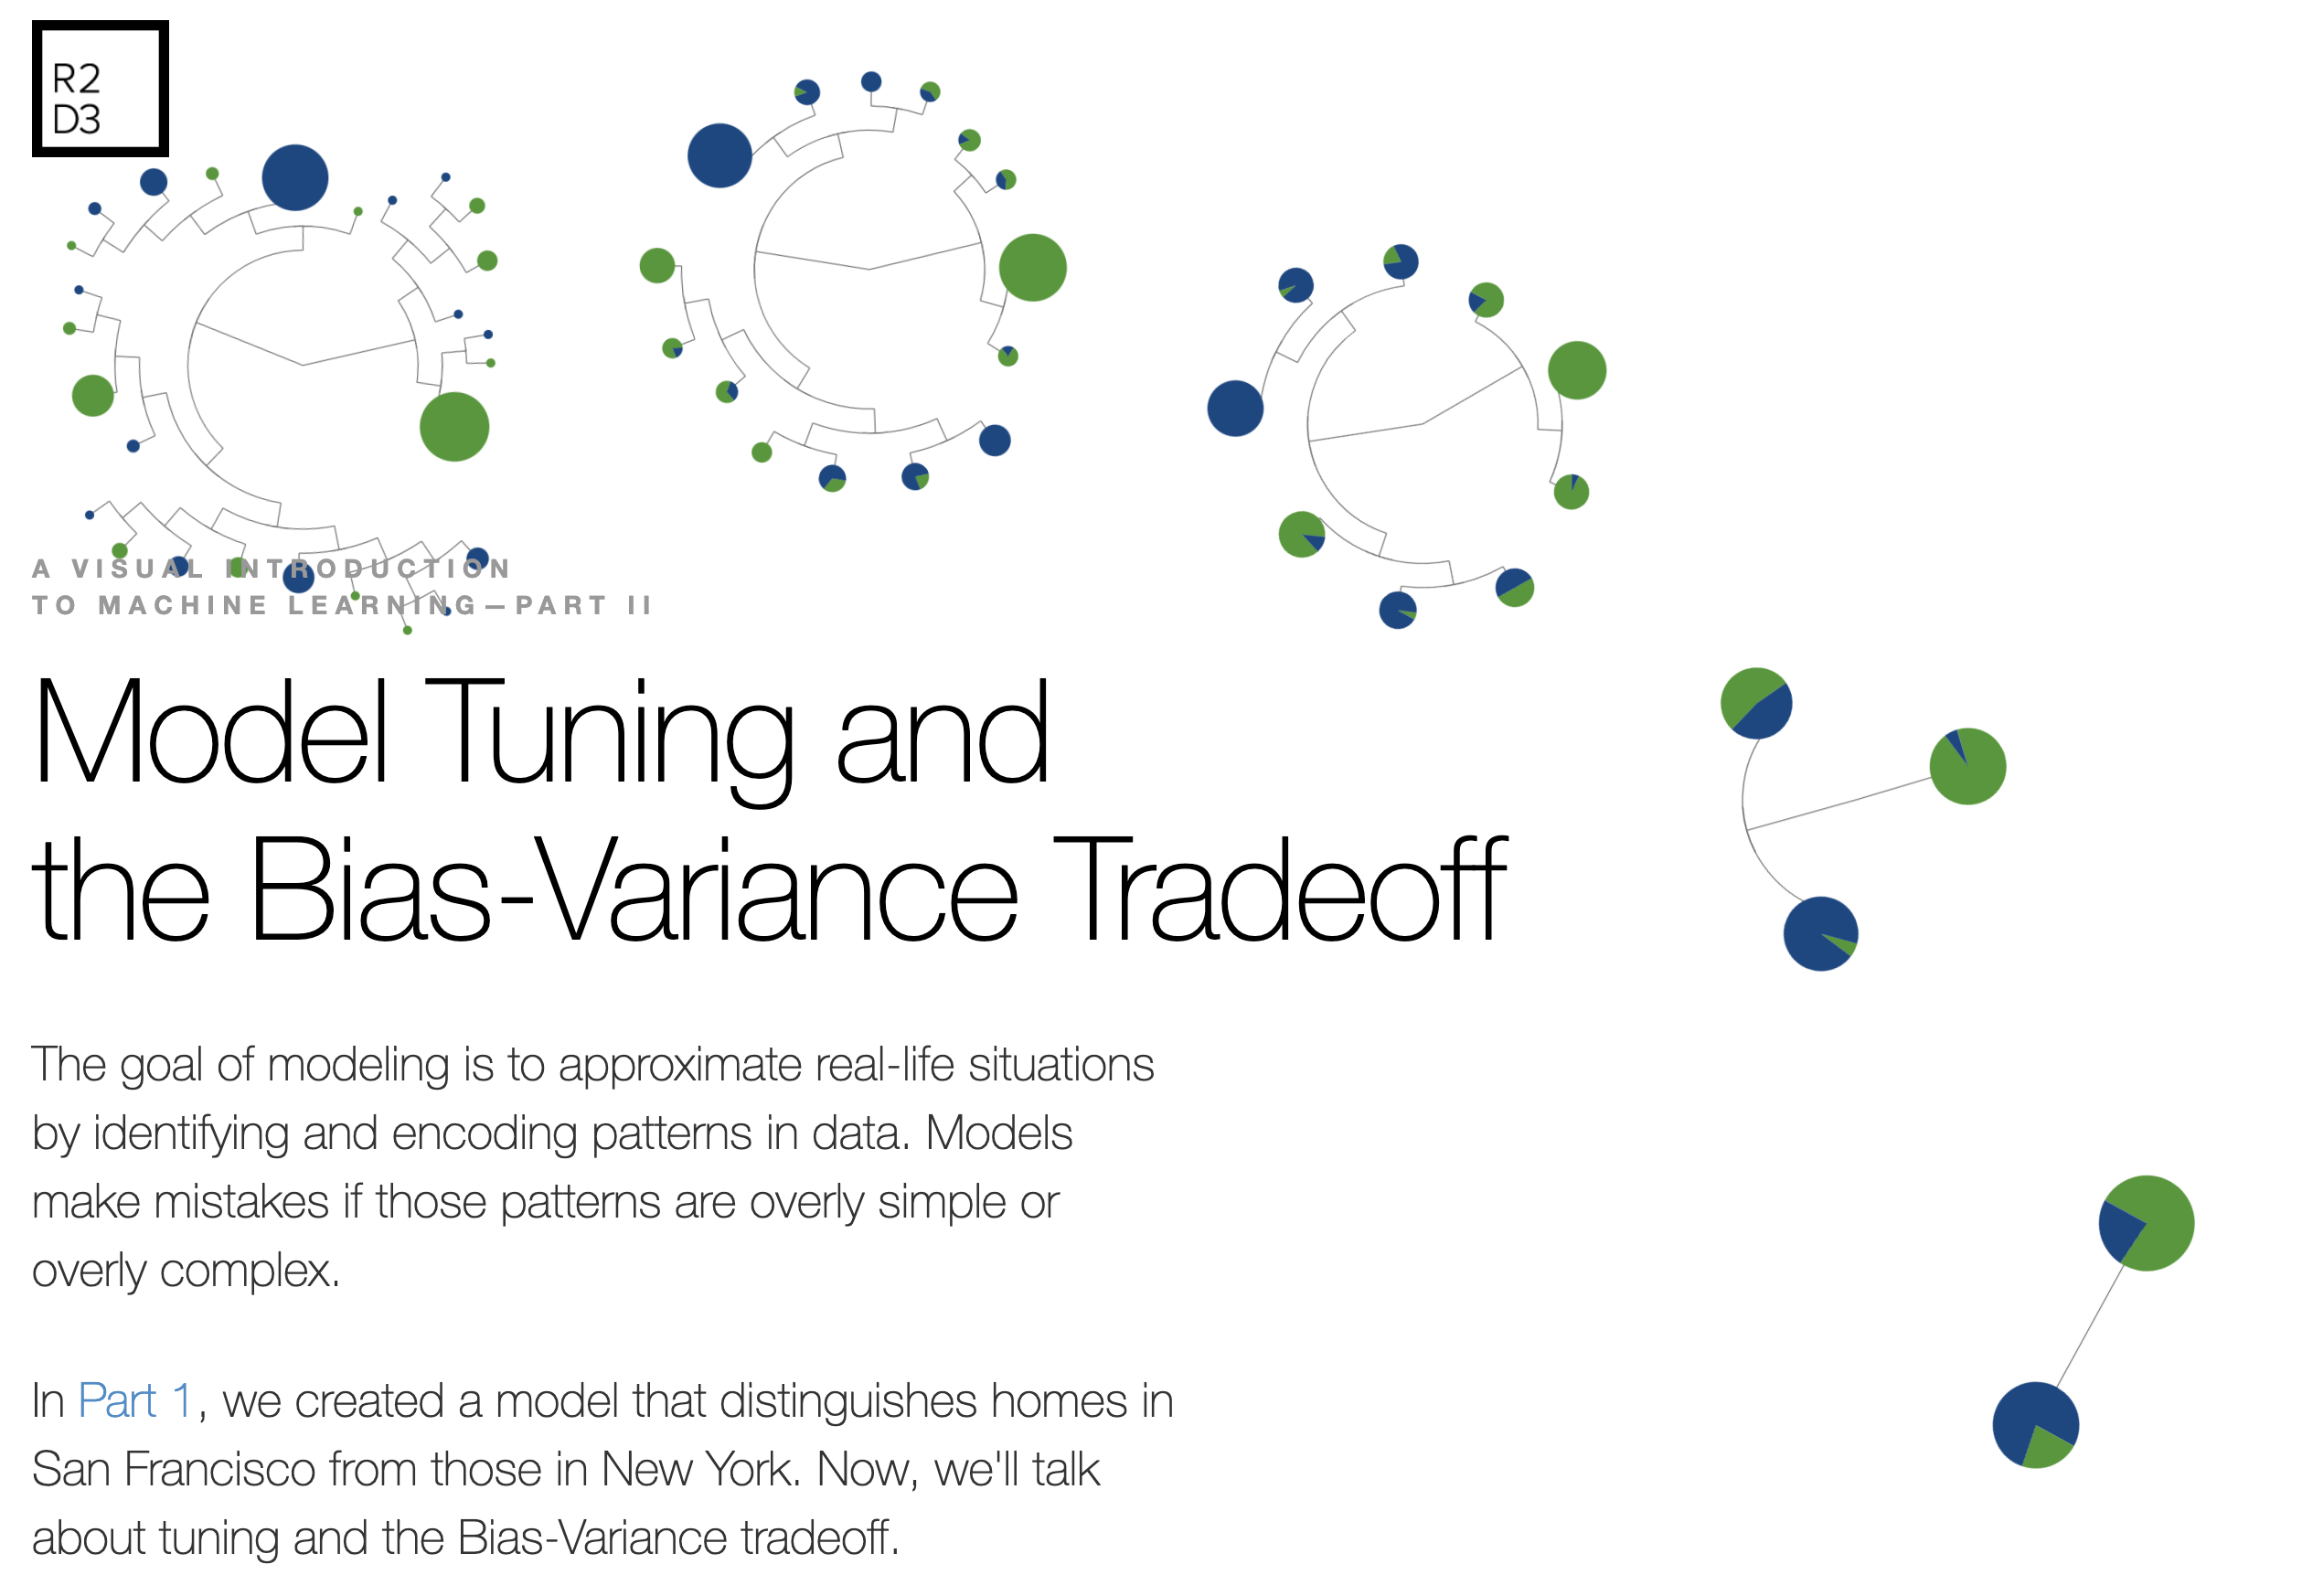 Great interactive viz at http://www.r2d3.us/visual-intro-to-machine-learning-part-2/